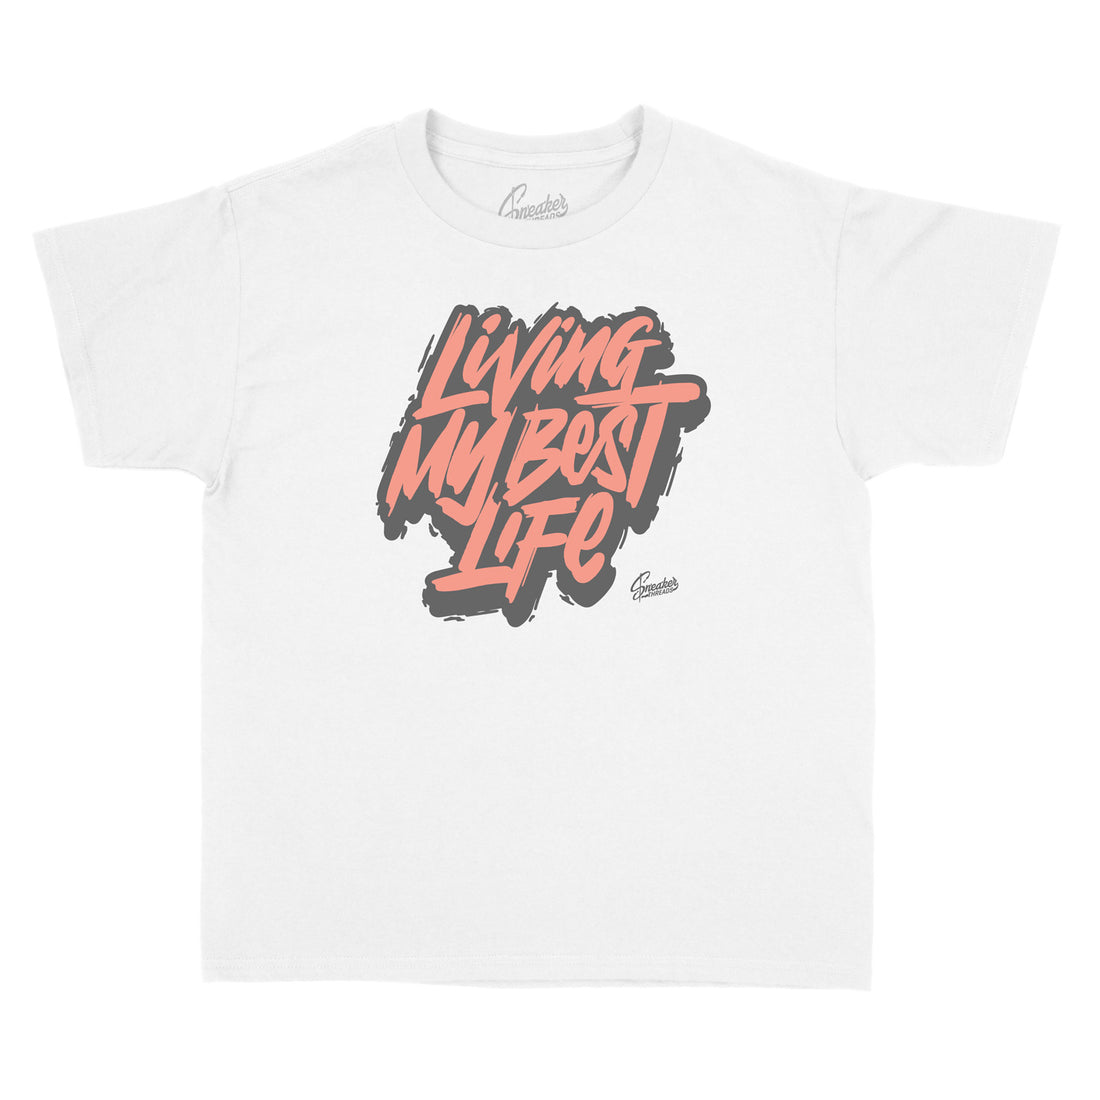 Kids inertia sneaker has matching kids shirts designed to match perfectly with the yeezy sneaker